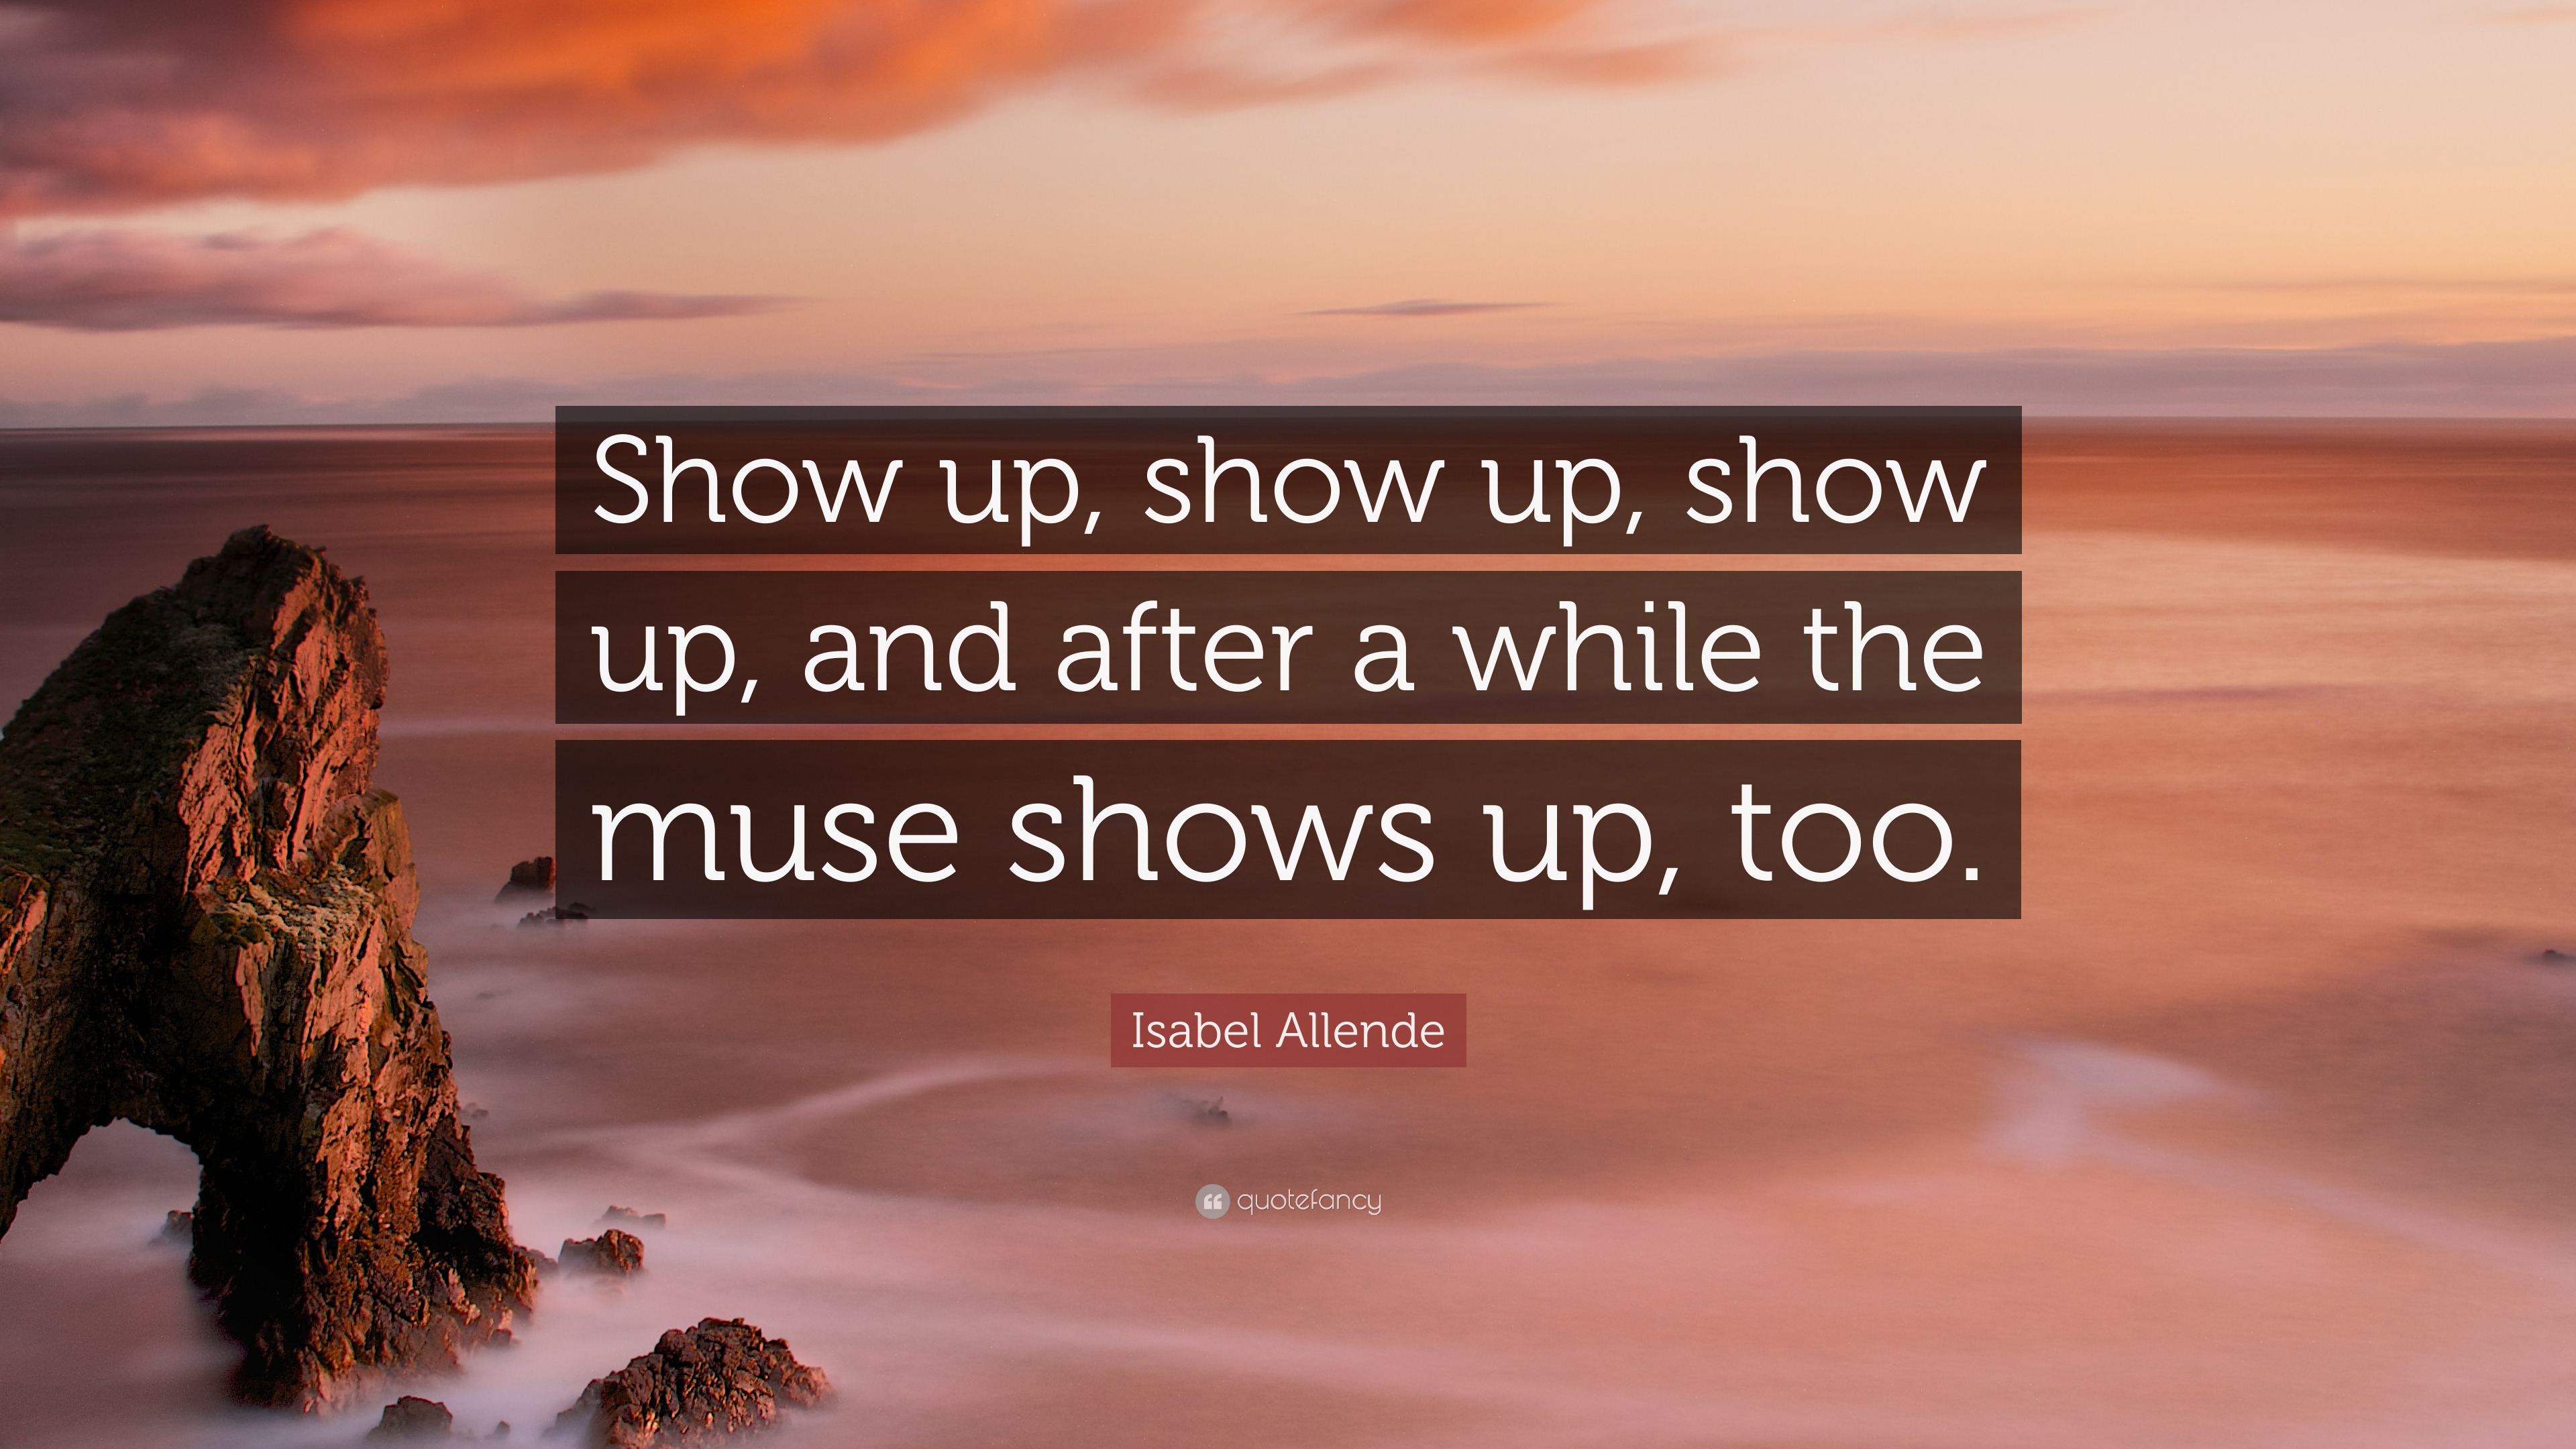 Isabel Allende Quote: “Show up, show up, show up, and after a while the